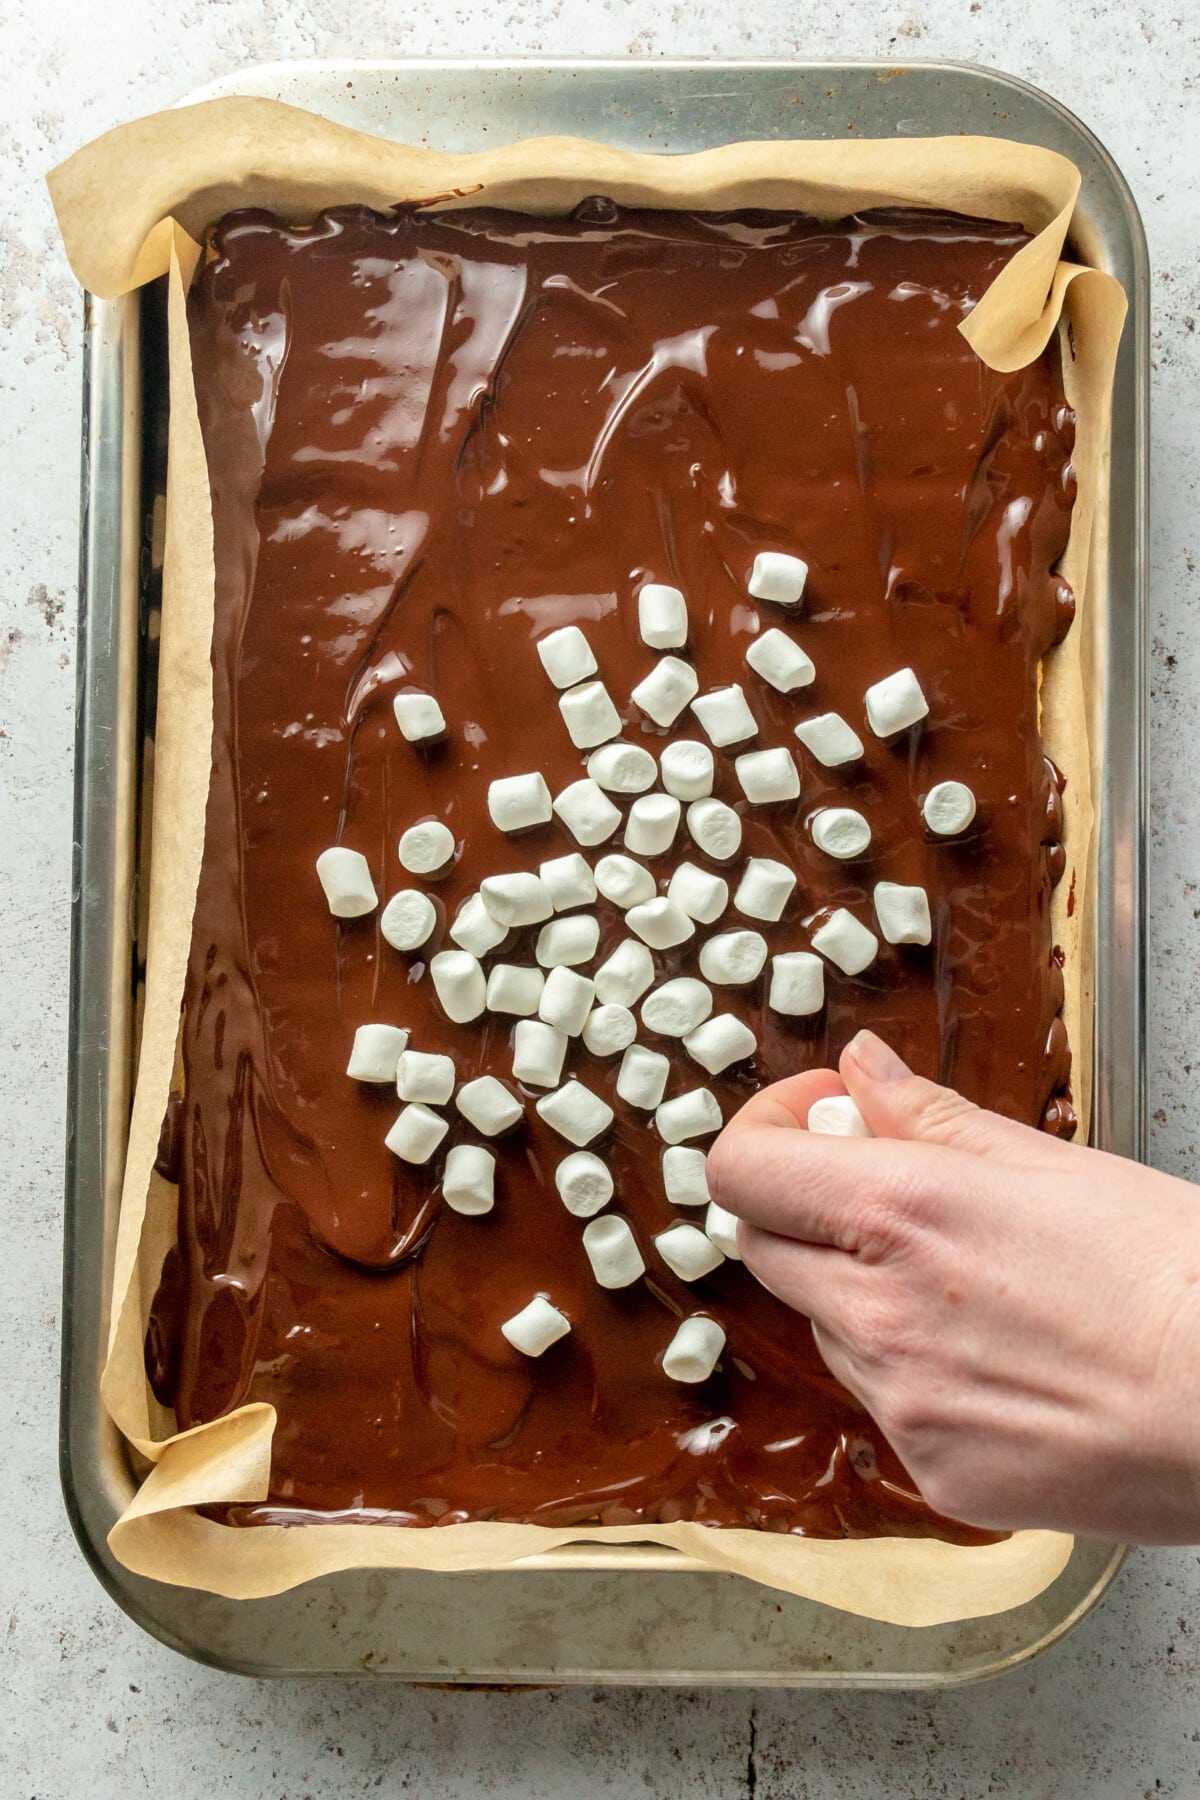 Marshmallows are scattered over melted chocolate on a lined rimmed baking sheet on a light grey surface.